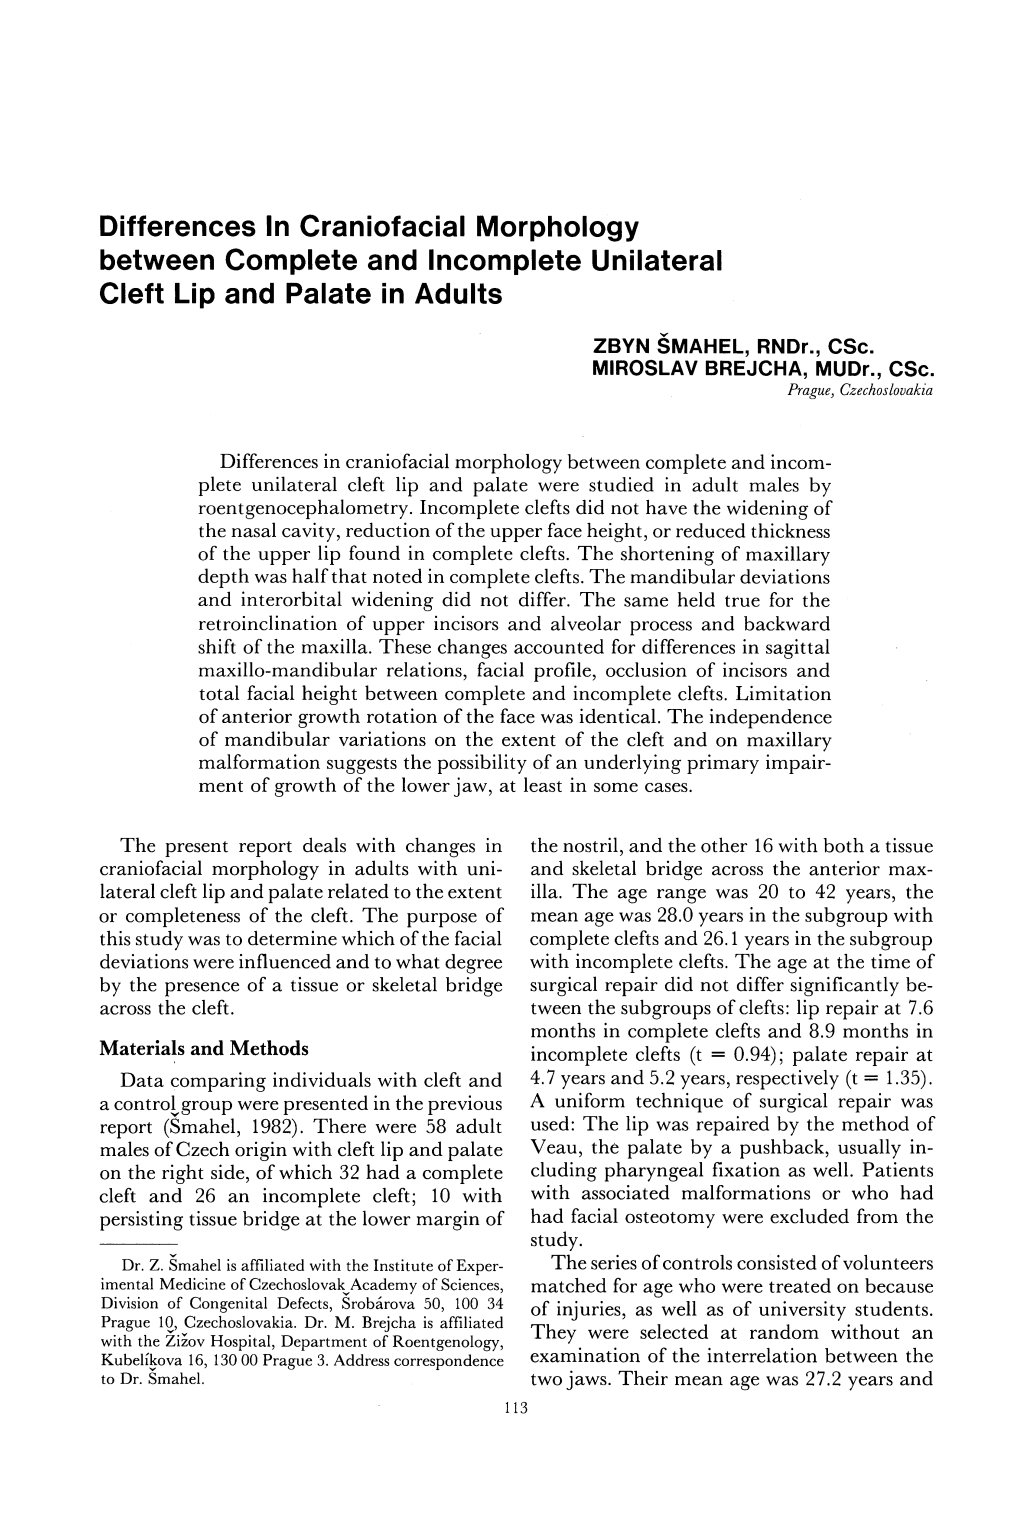 Differences in Craniofacial Morphology Between Complete and Incomplete Unilateral Cleft Lip and Palate in Adults